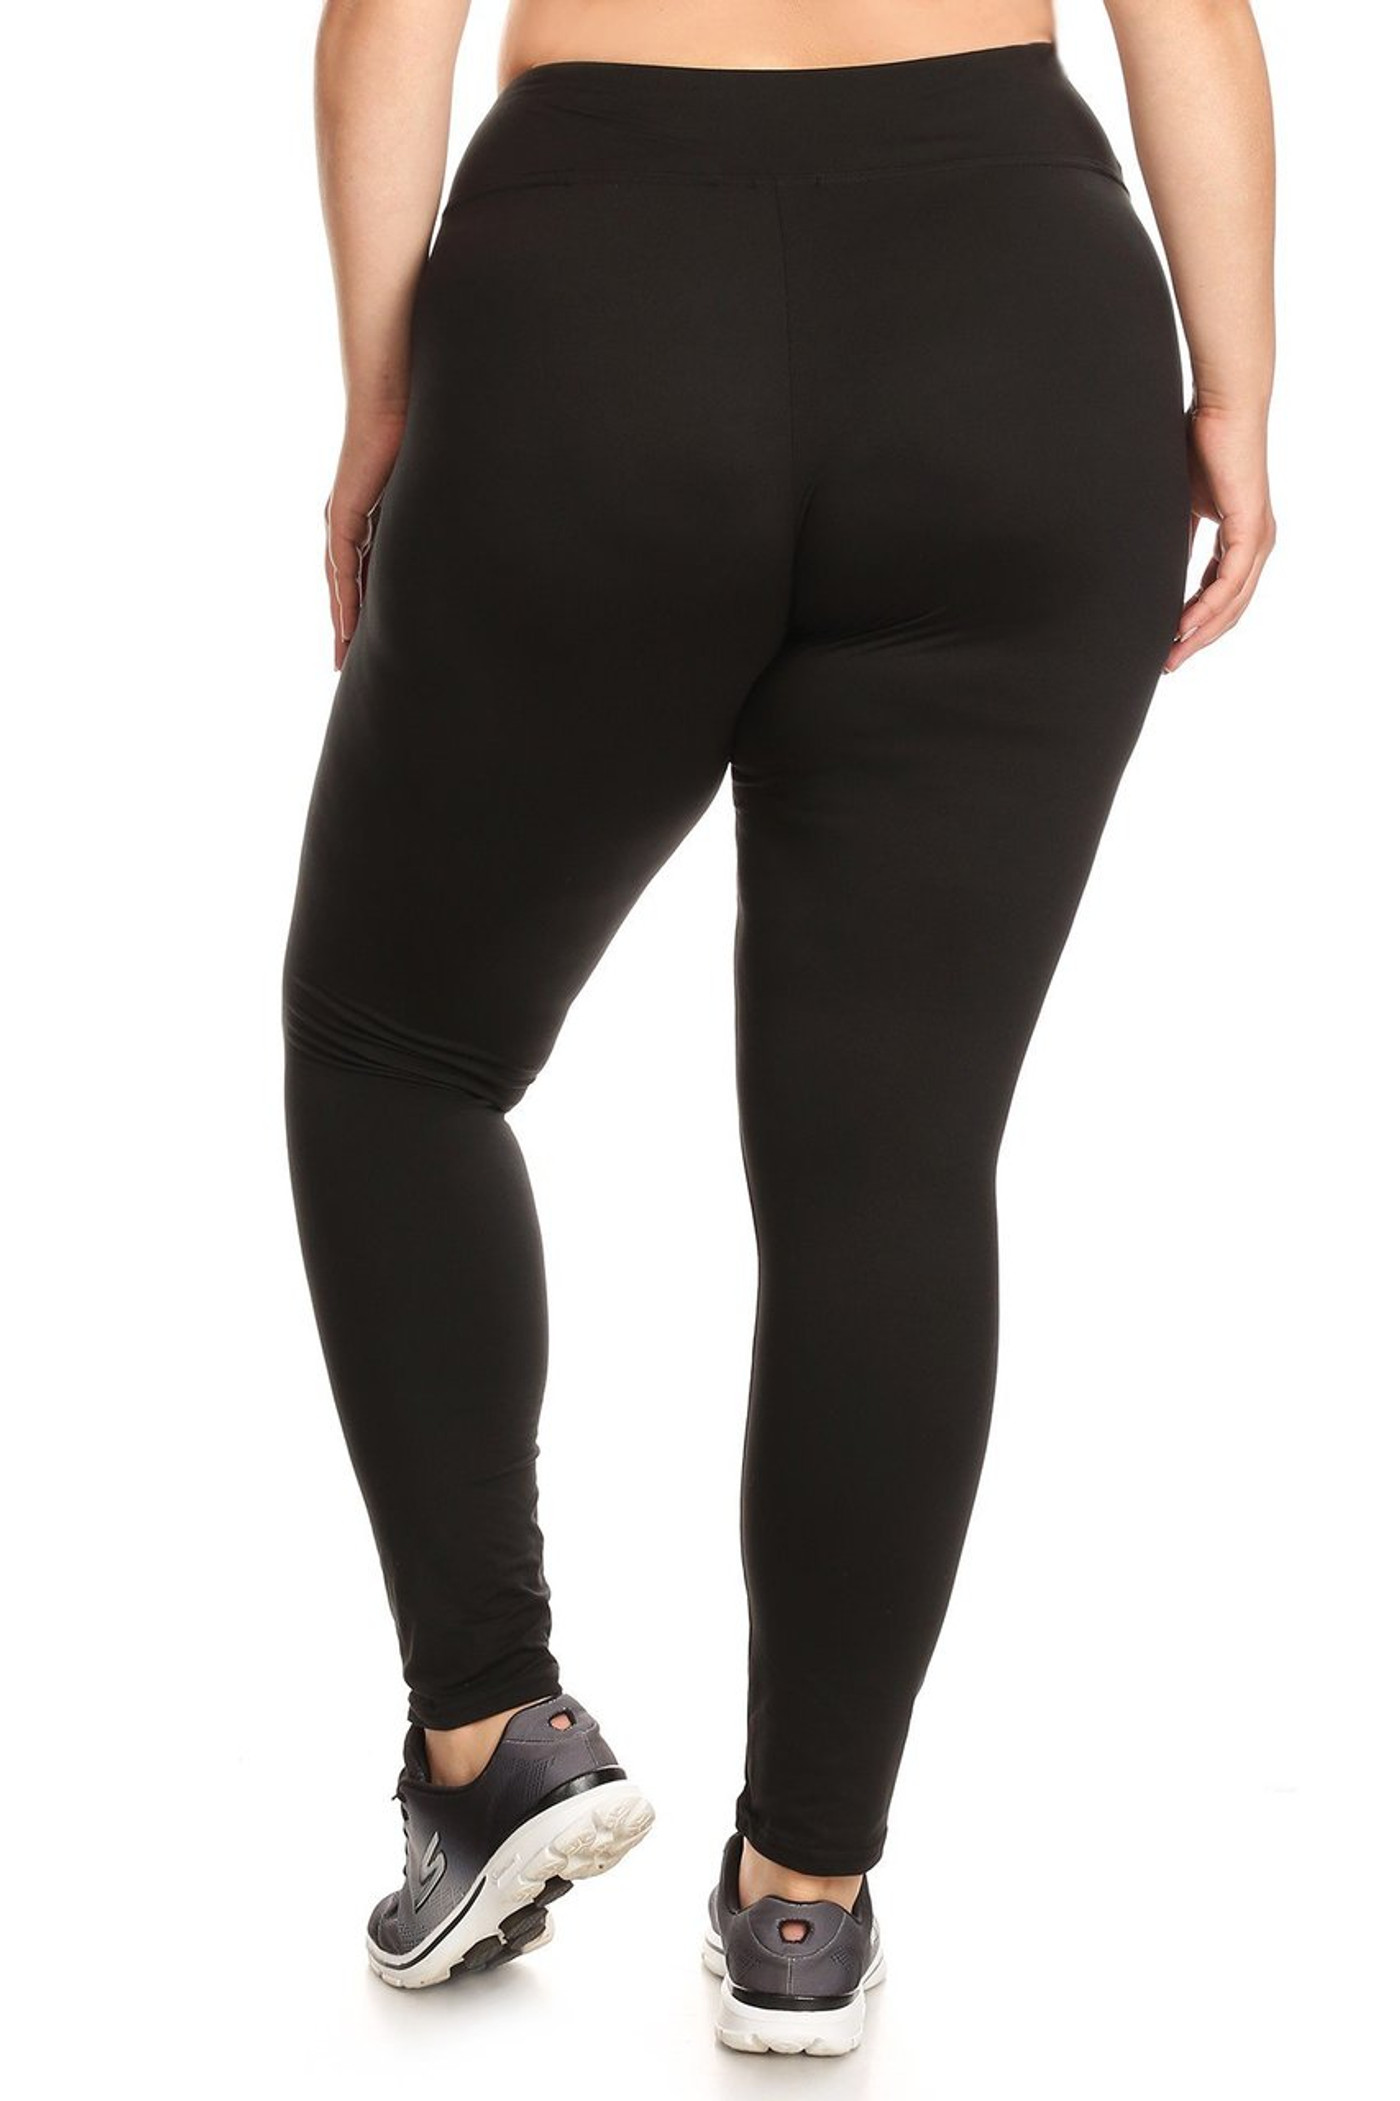 Brushed  back image of X7L105 - High Waisted Fleece Lined Sport Plus Size Leggings